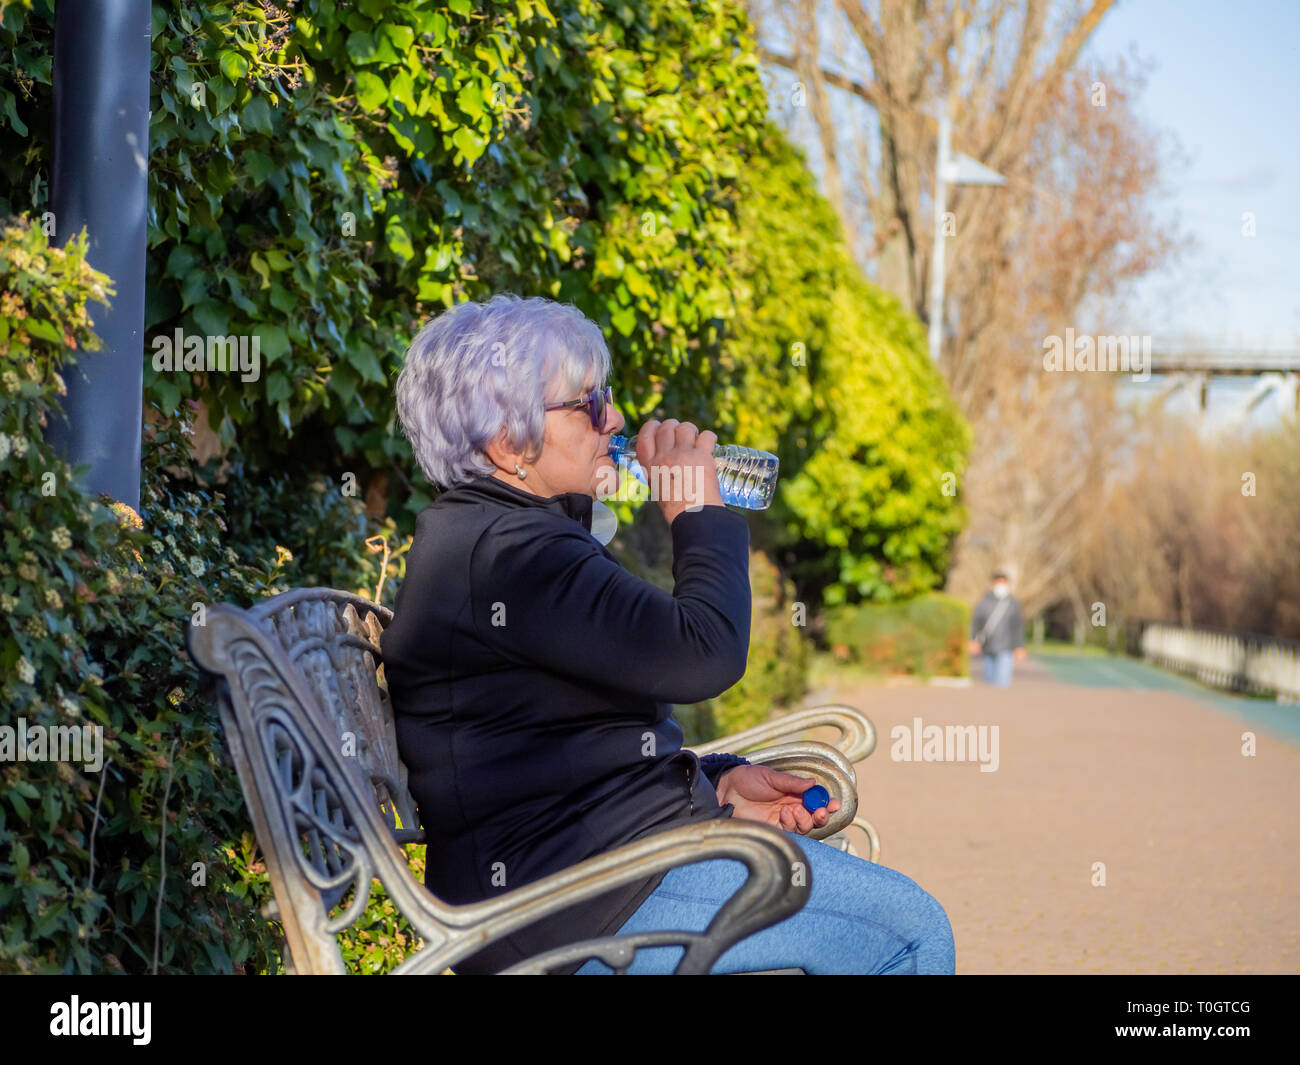 A senior woman with white hair sitting on a park bench drinking water from a plastic bottle Stock Photo